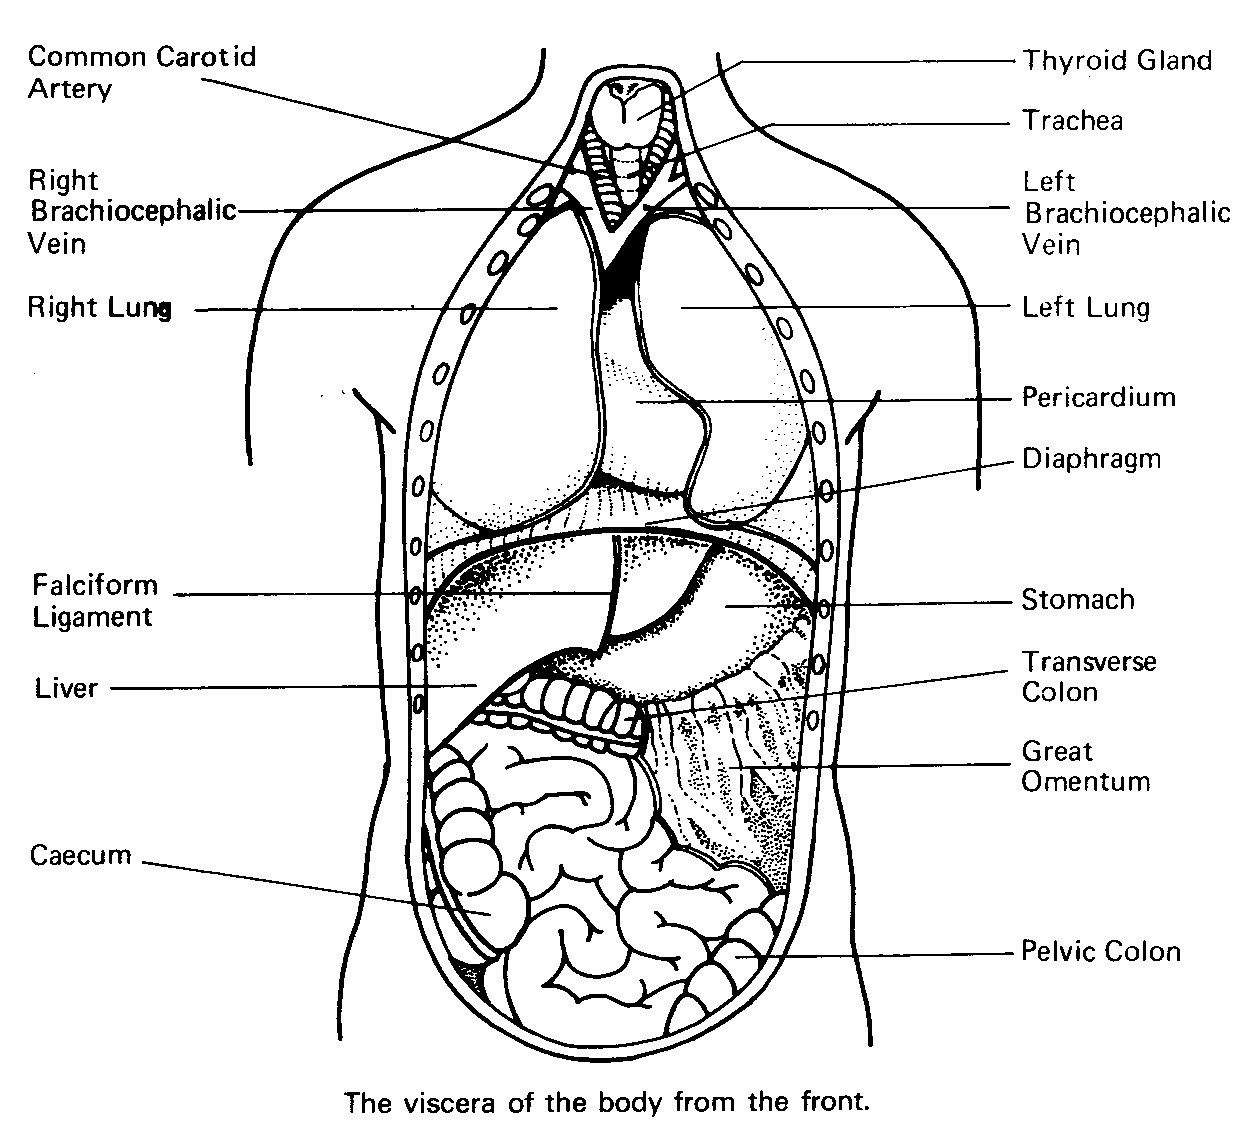 Anatomy Coloring Pages Human Organs Coloring Page Anatomy Coloring 